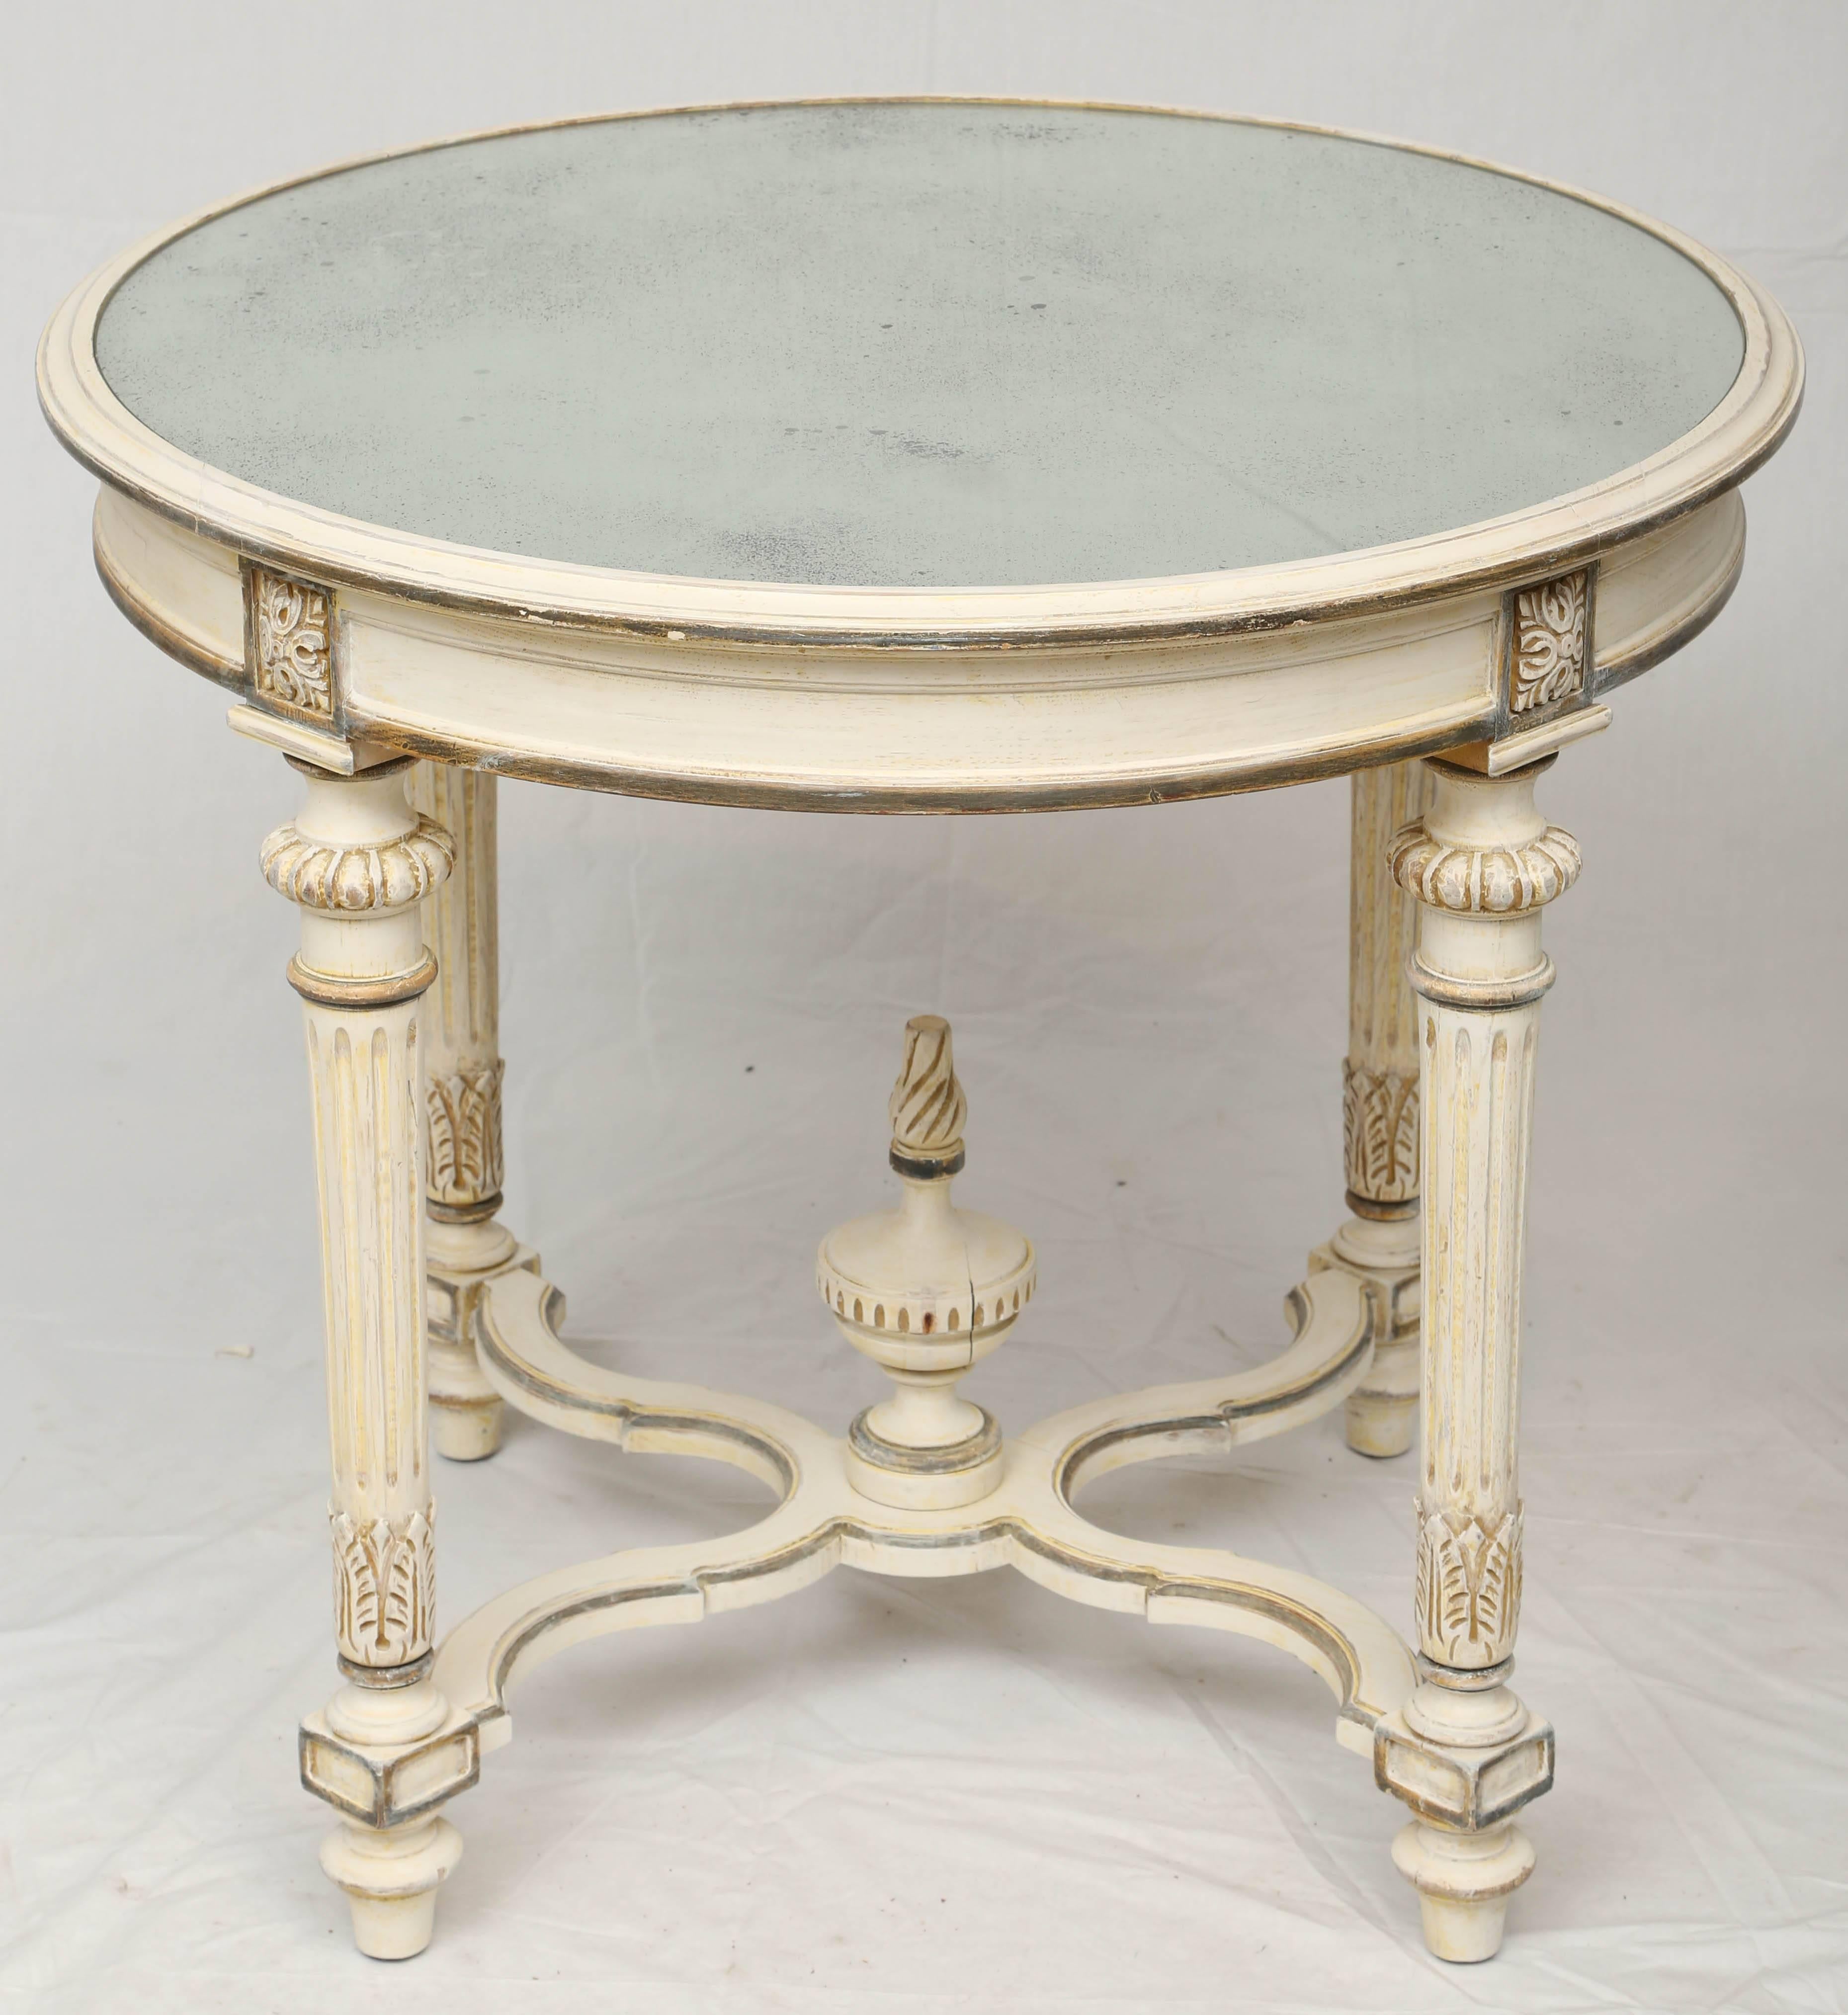 Occasional table, having a round top of distressed mirror, on painted base, channelled apron raised on rosette-headed, stop-fluted, round, tapering legs, ending in touipe feet, joined by serpentine stretcher, centered with a flaming urn finial.